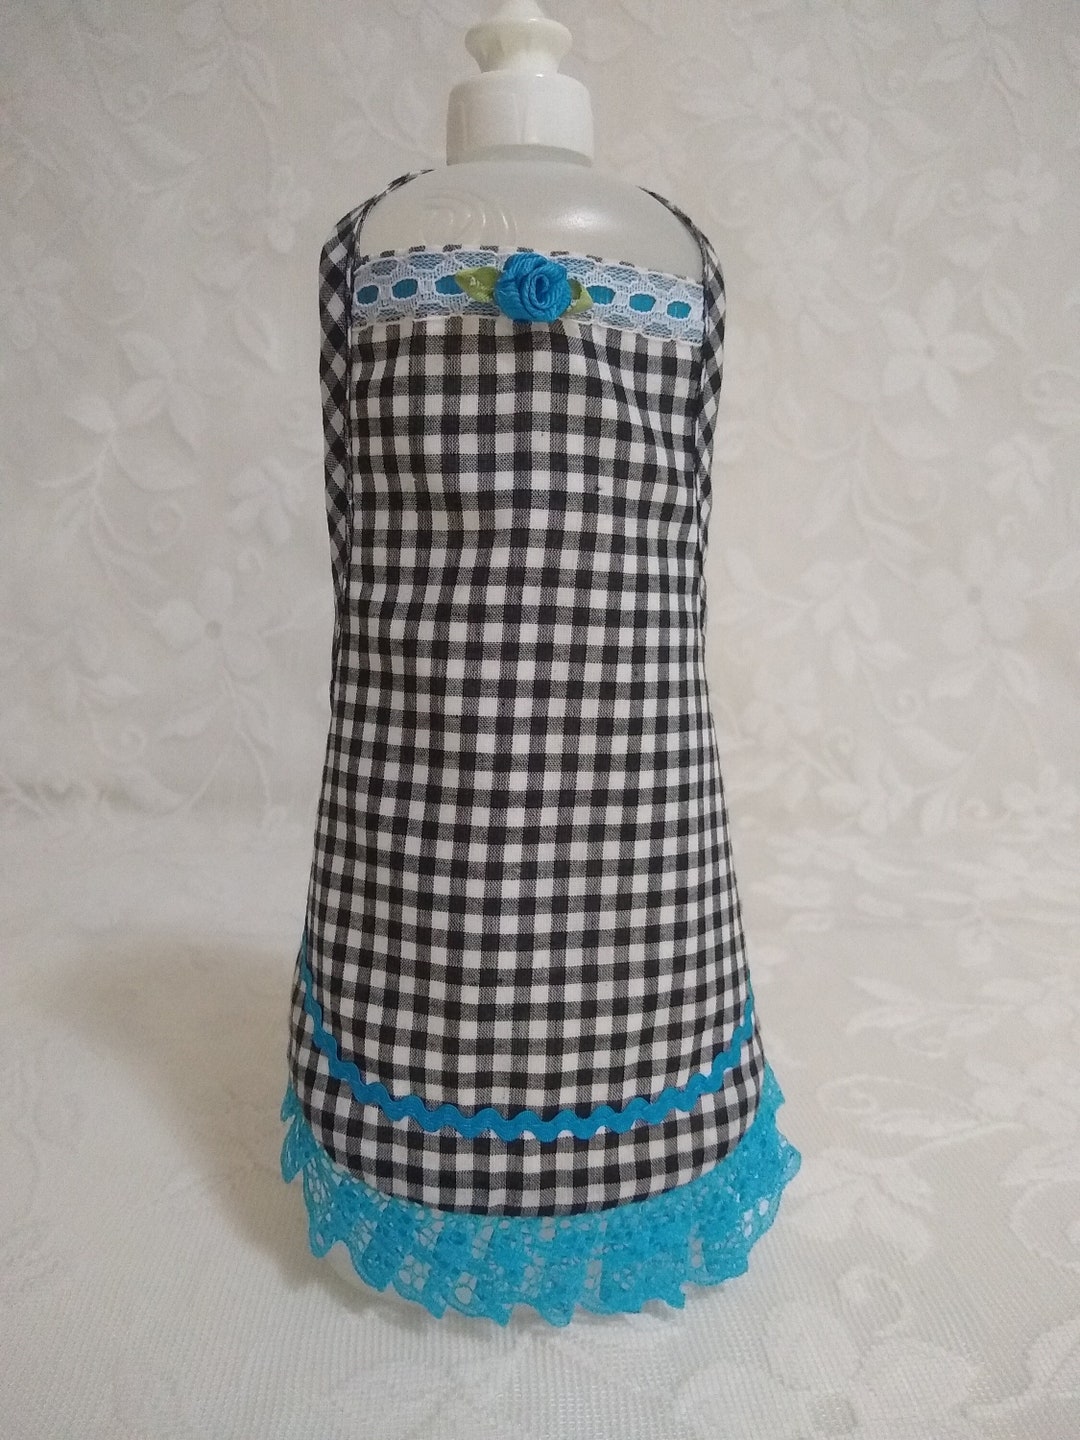 Dish Soap Bottle Apron, Apron With Gingham and Lace Finish, Soap Bottle ...